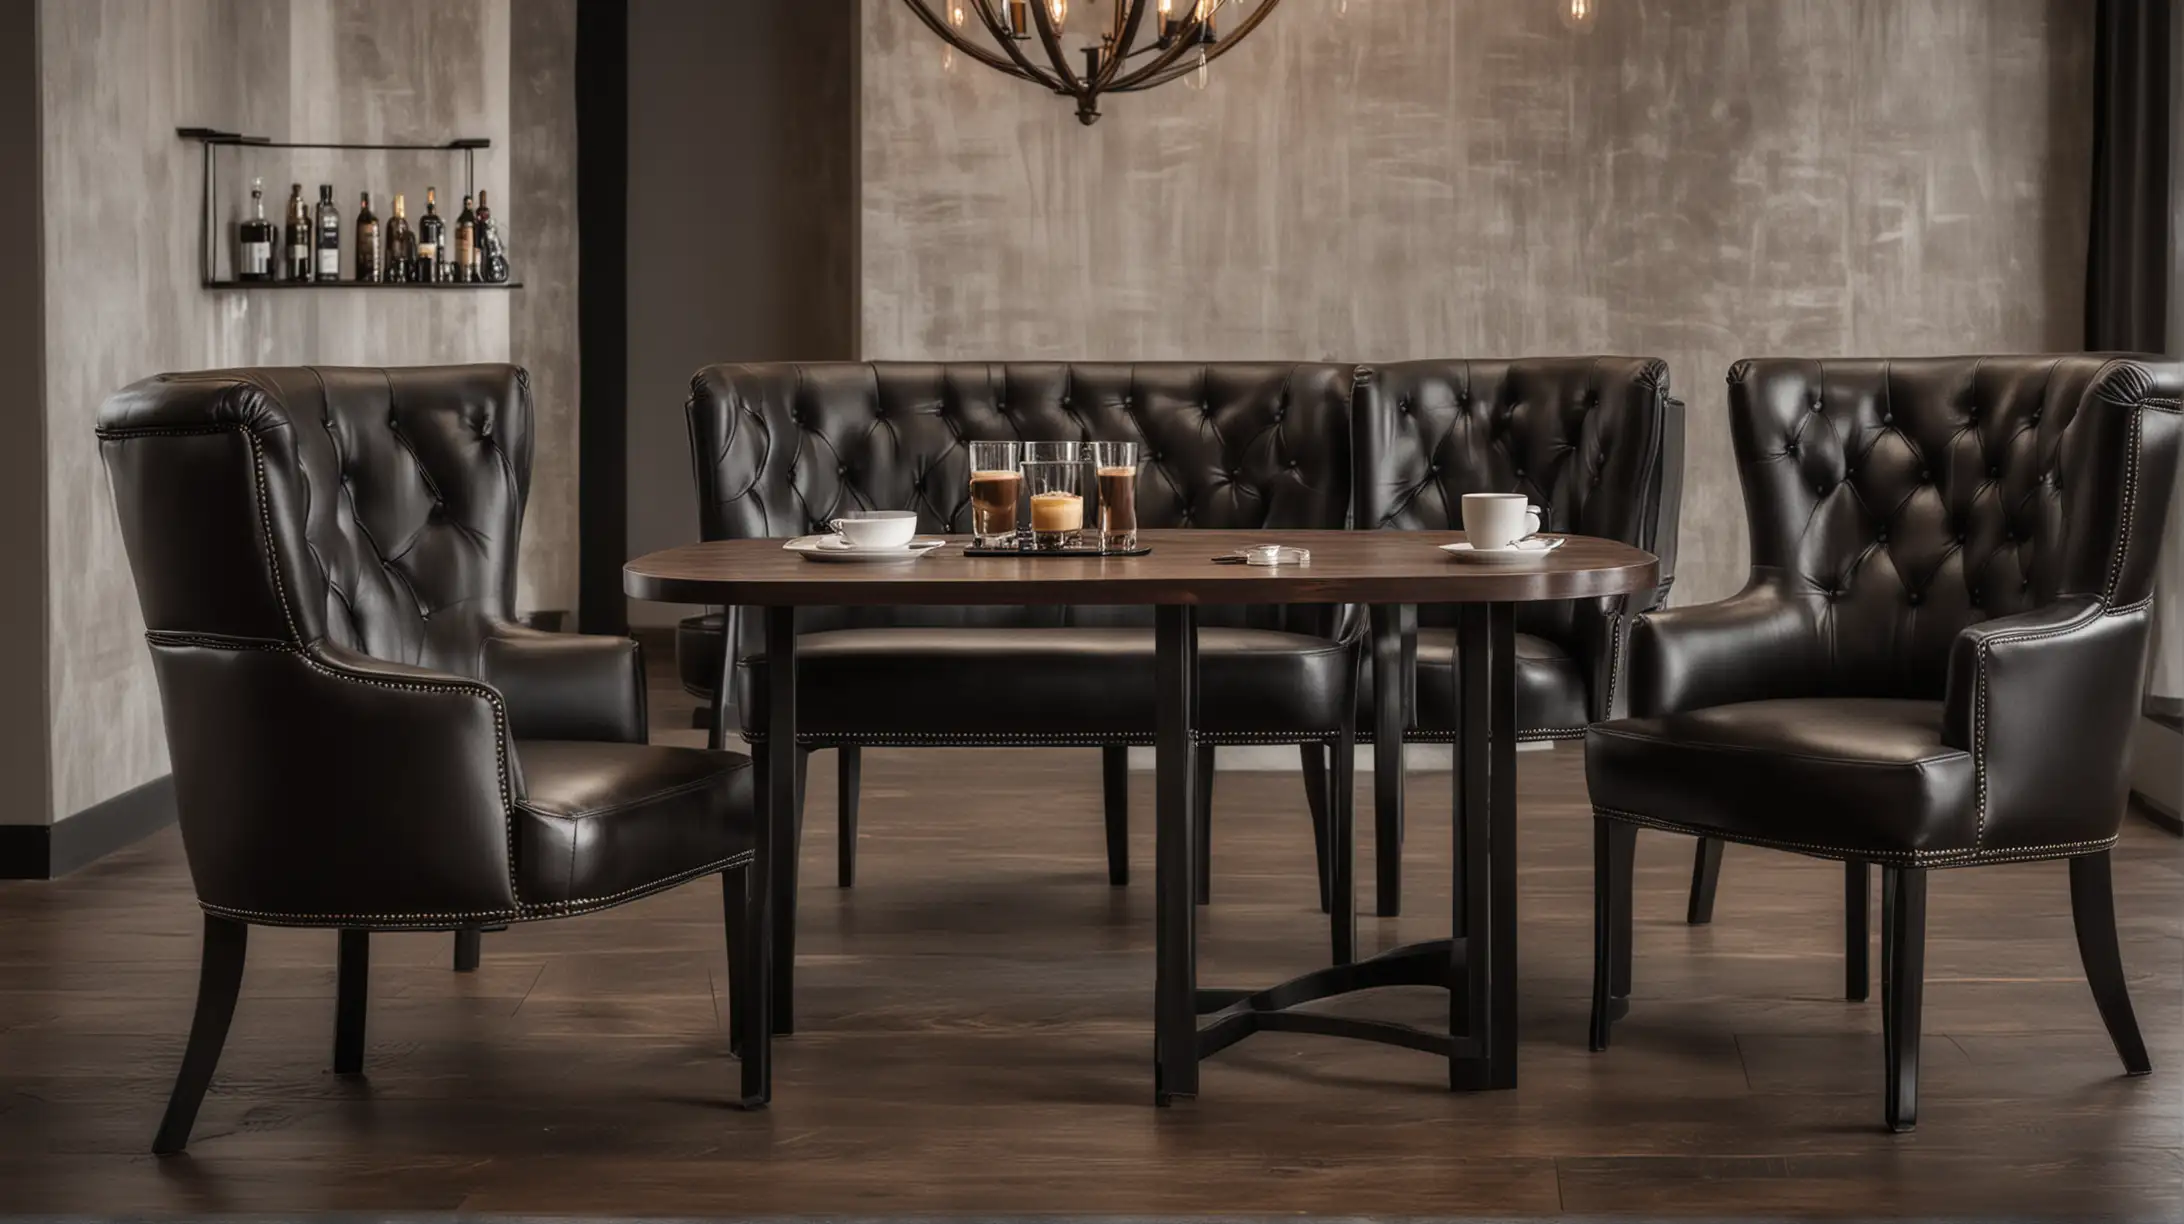 an exclusive coffee club, with black and platinum color design, using leather chairs and dark wooden table